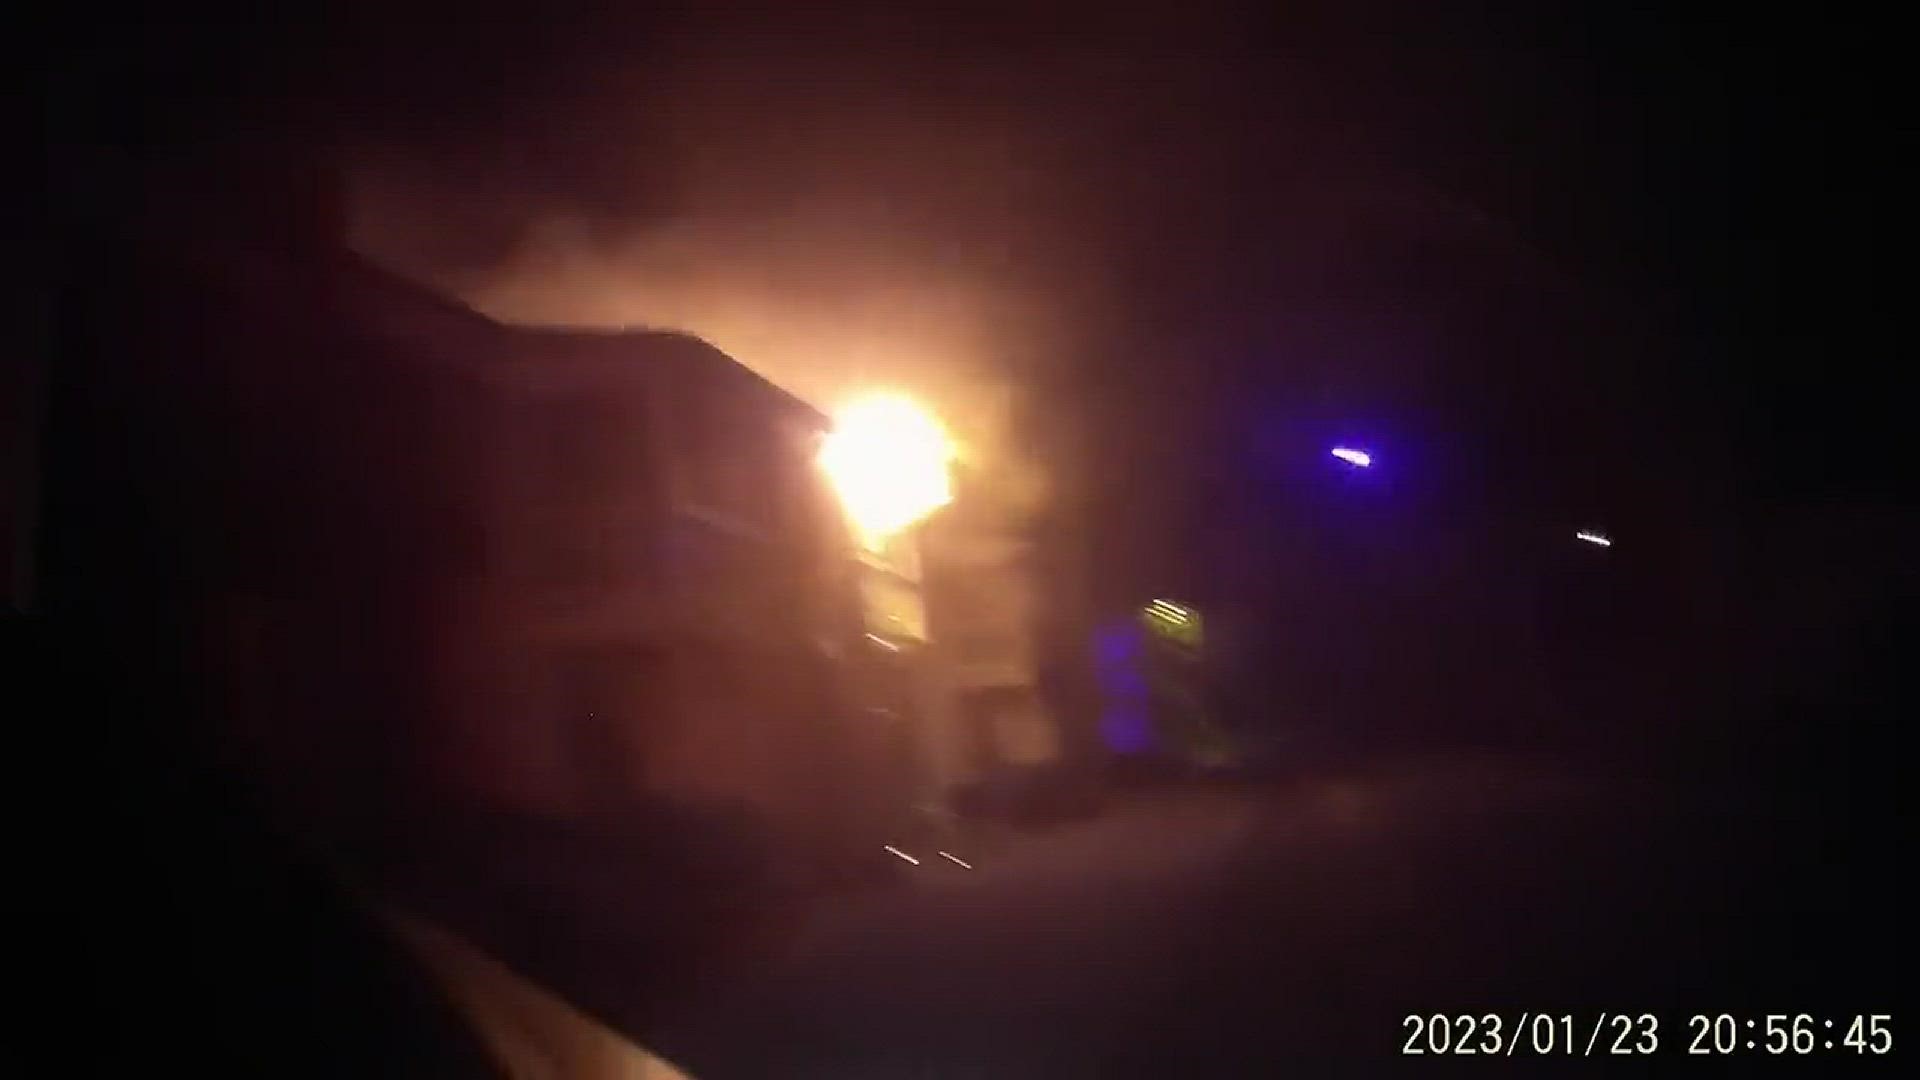 Winston-Salem Fire Department responded to the fire on Monday night.